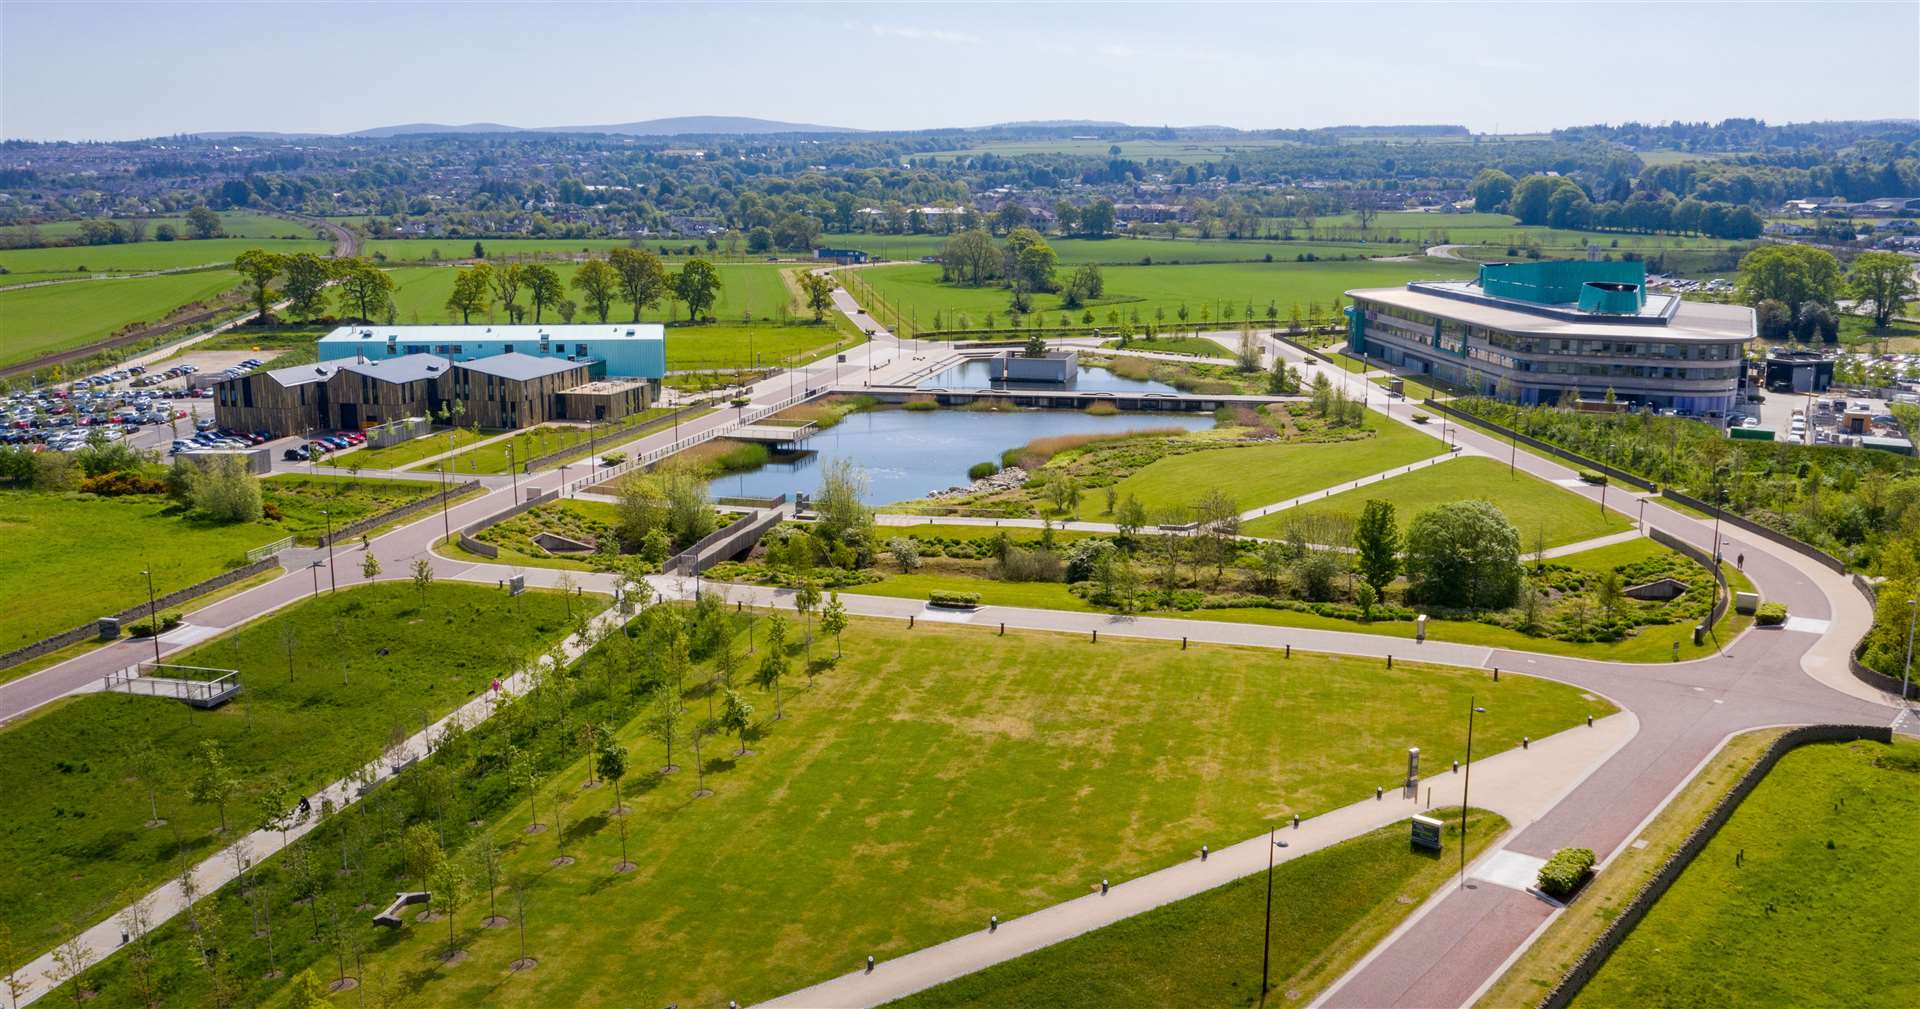 Plans have been approved for further development at Inverness Campus, with Highlands and Islands Enterprise keen to attract more tech firms despite a loss of major European funding.